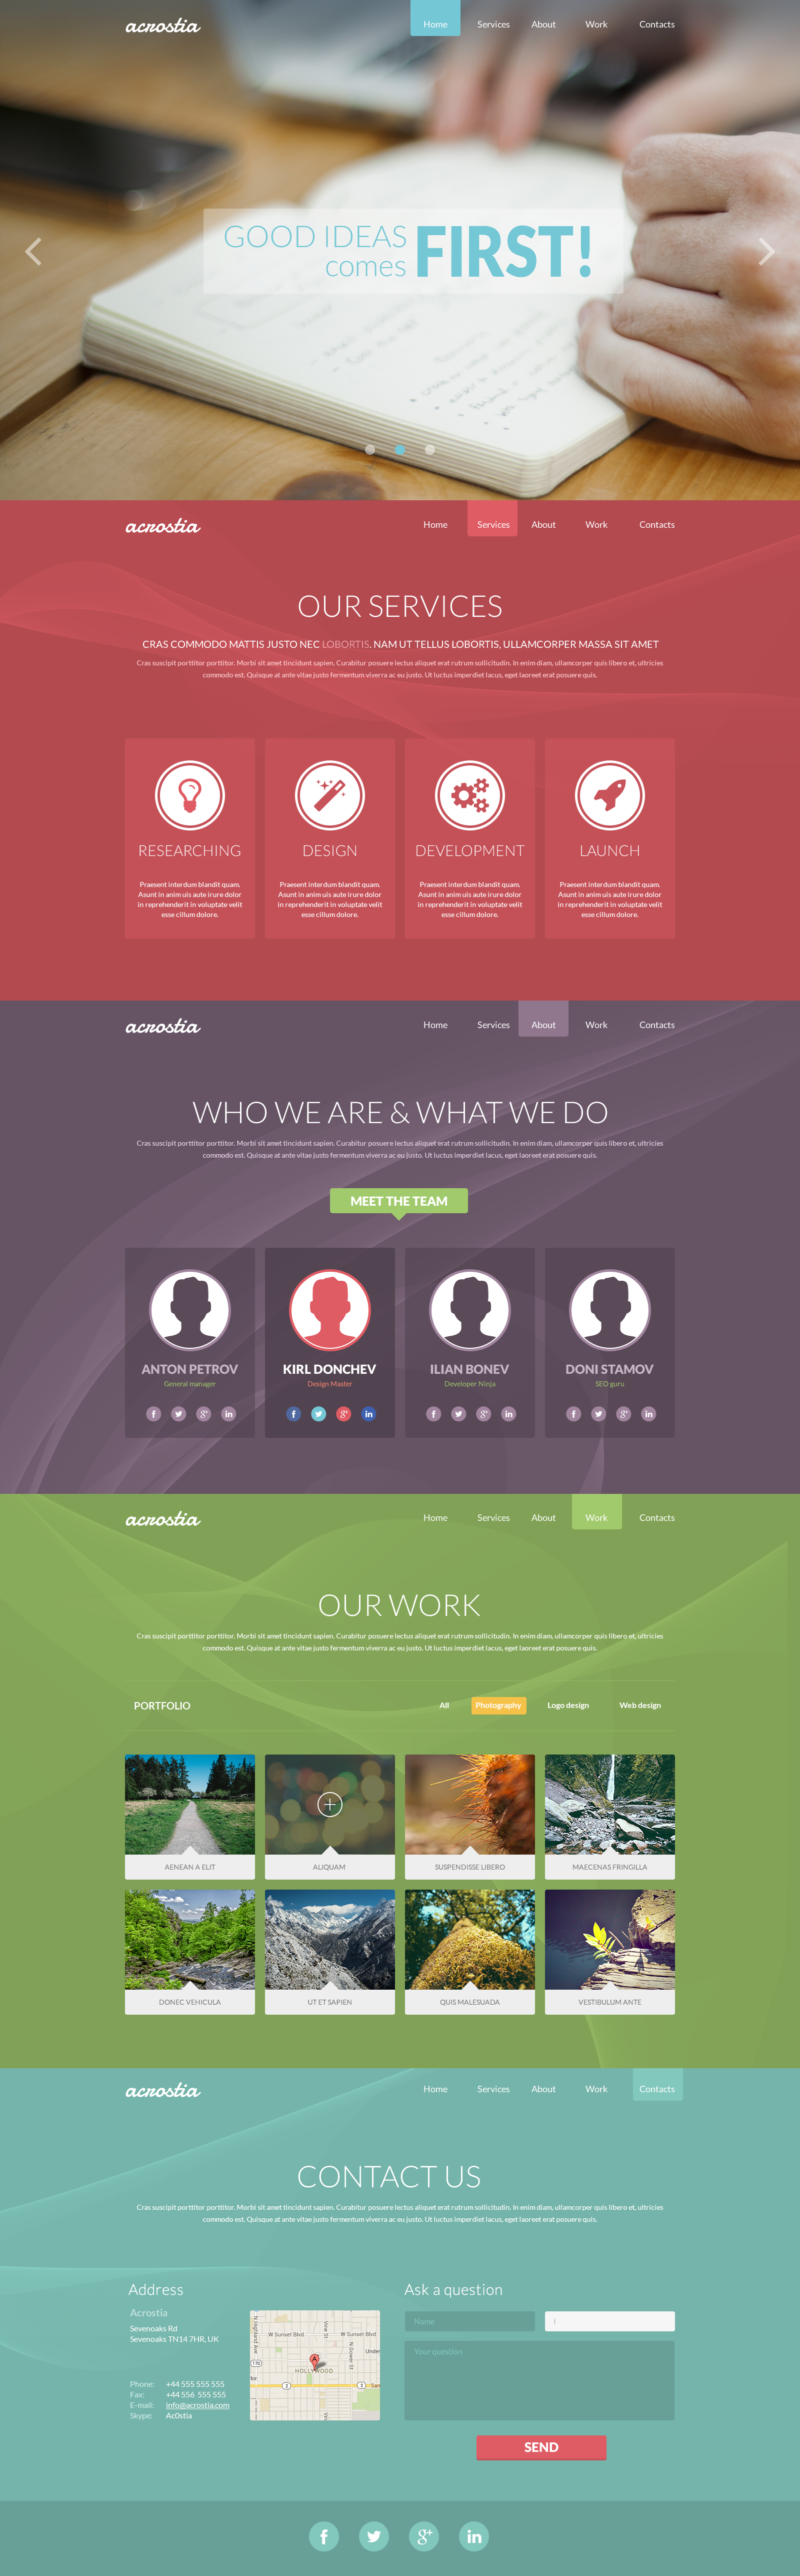 One Page Portfolio Website Template Free Psd Download vrogue co